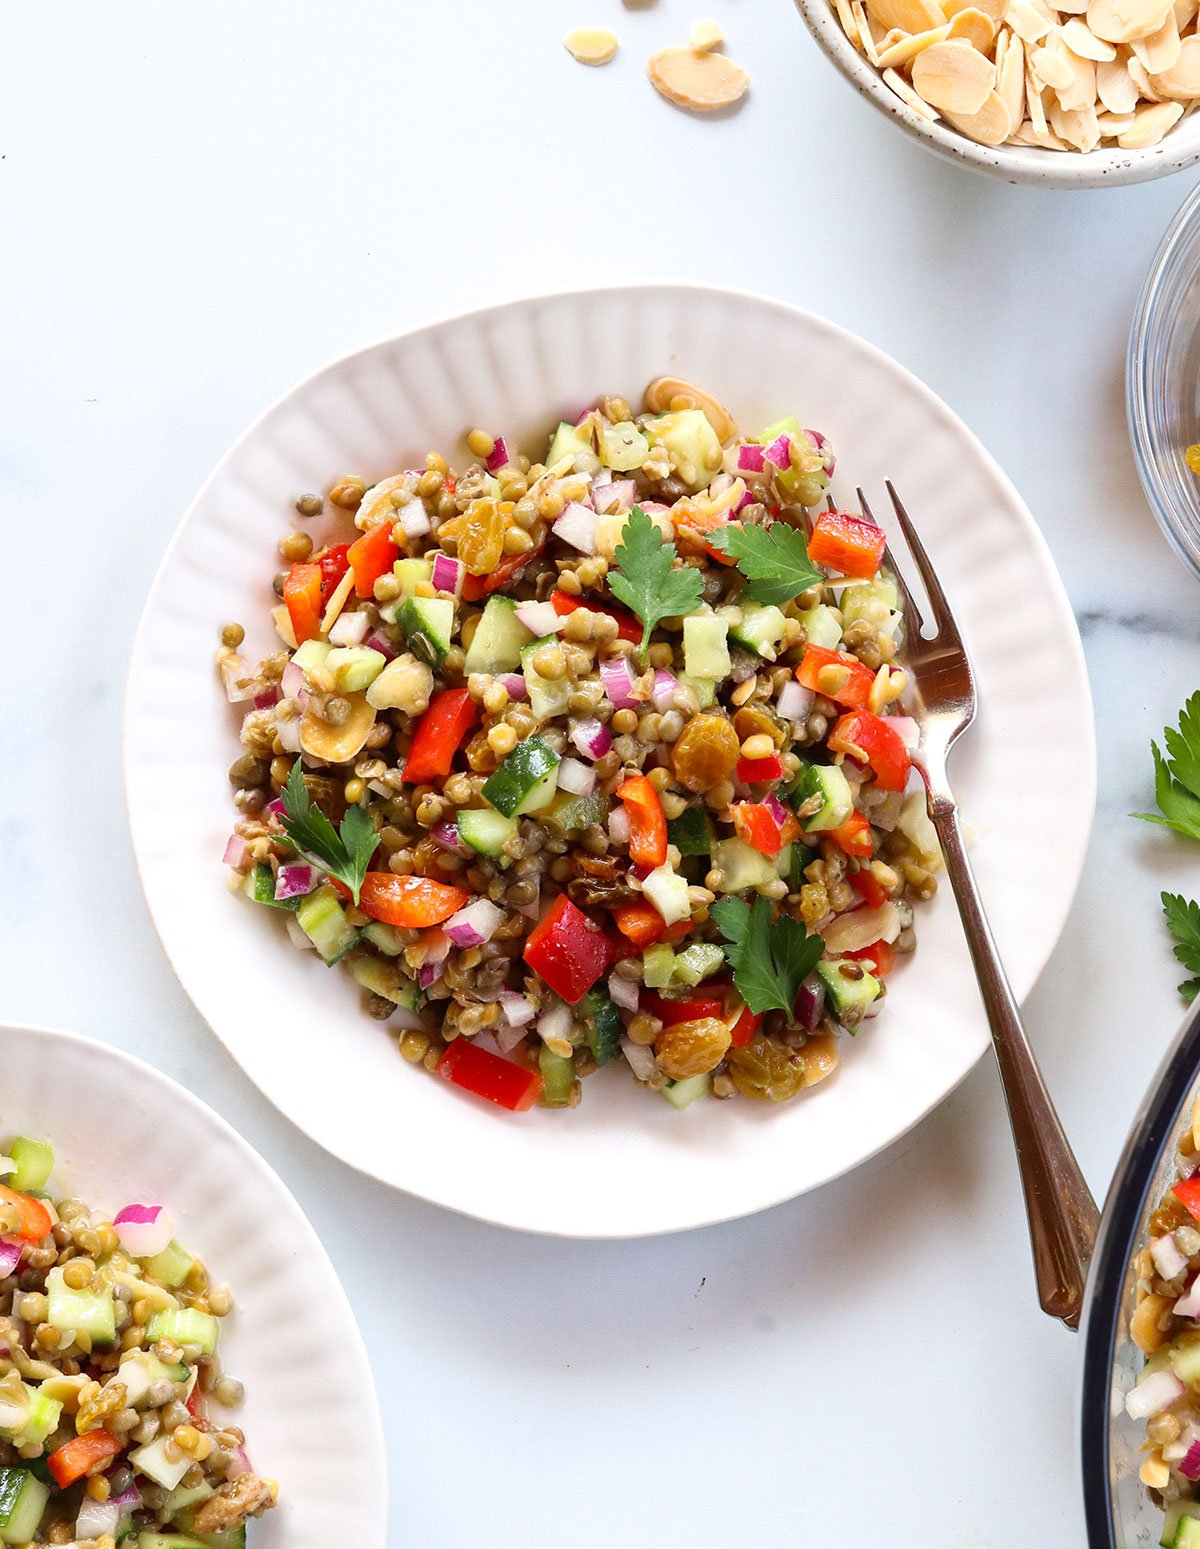 Lentil salad recipe served on two white plates with a fork.